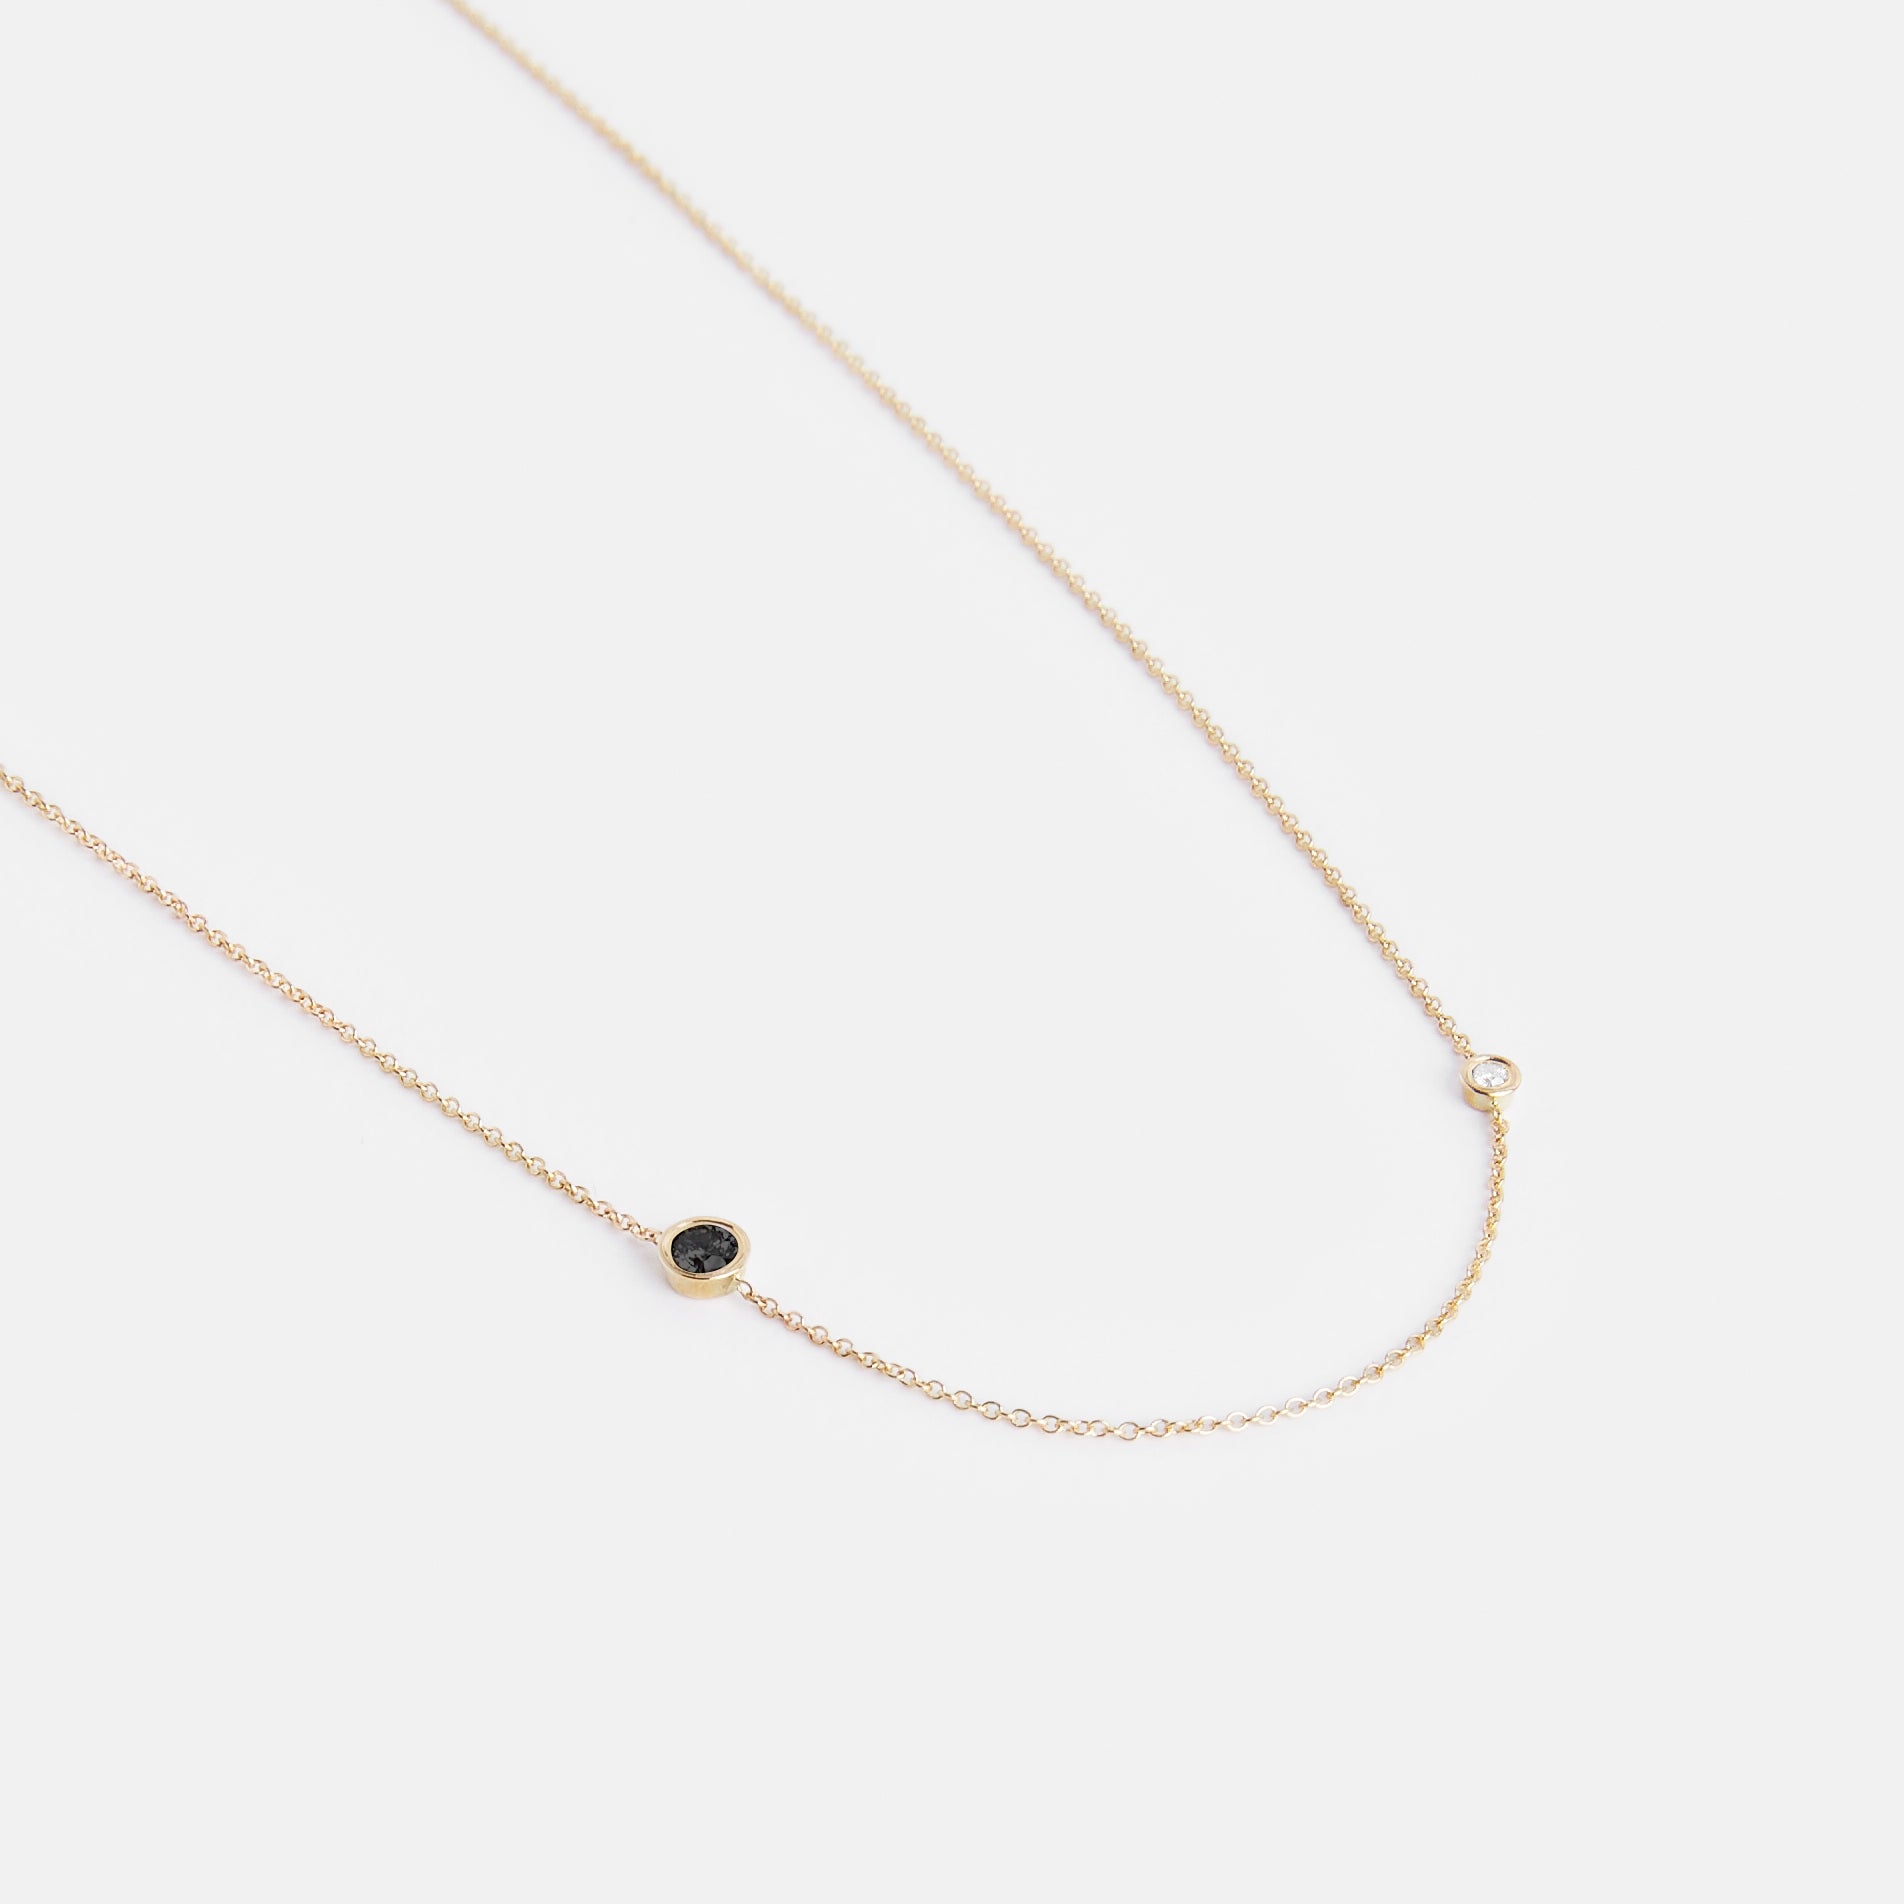 Iba Simple Necklace in 14k Gold set with Black and White Diamonds By SHW Fine Jewelry NYC